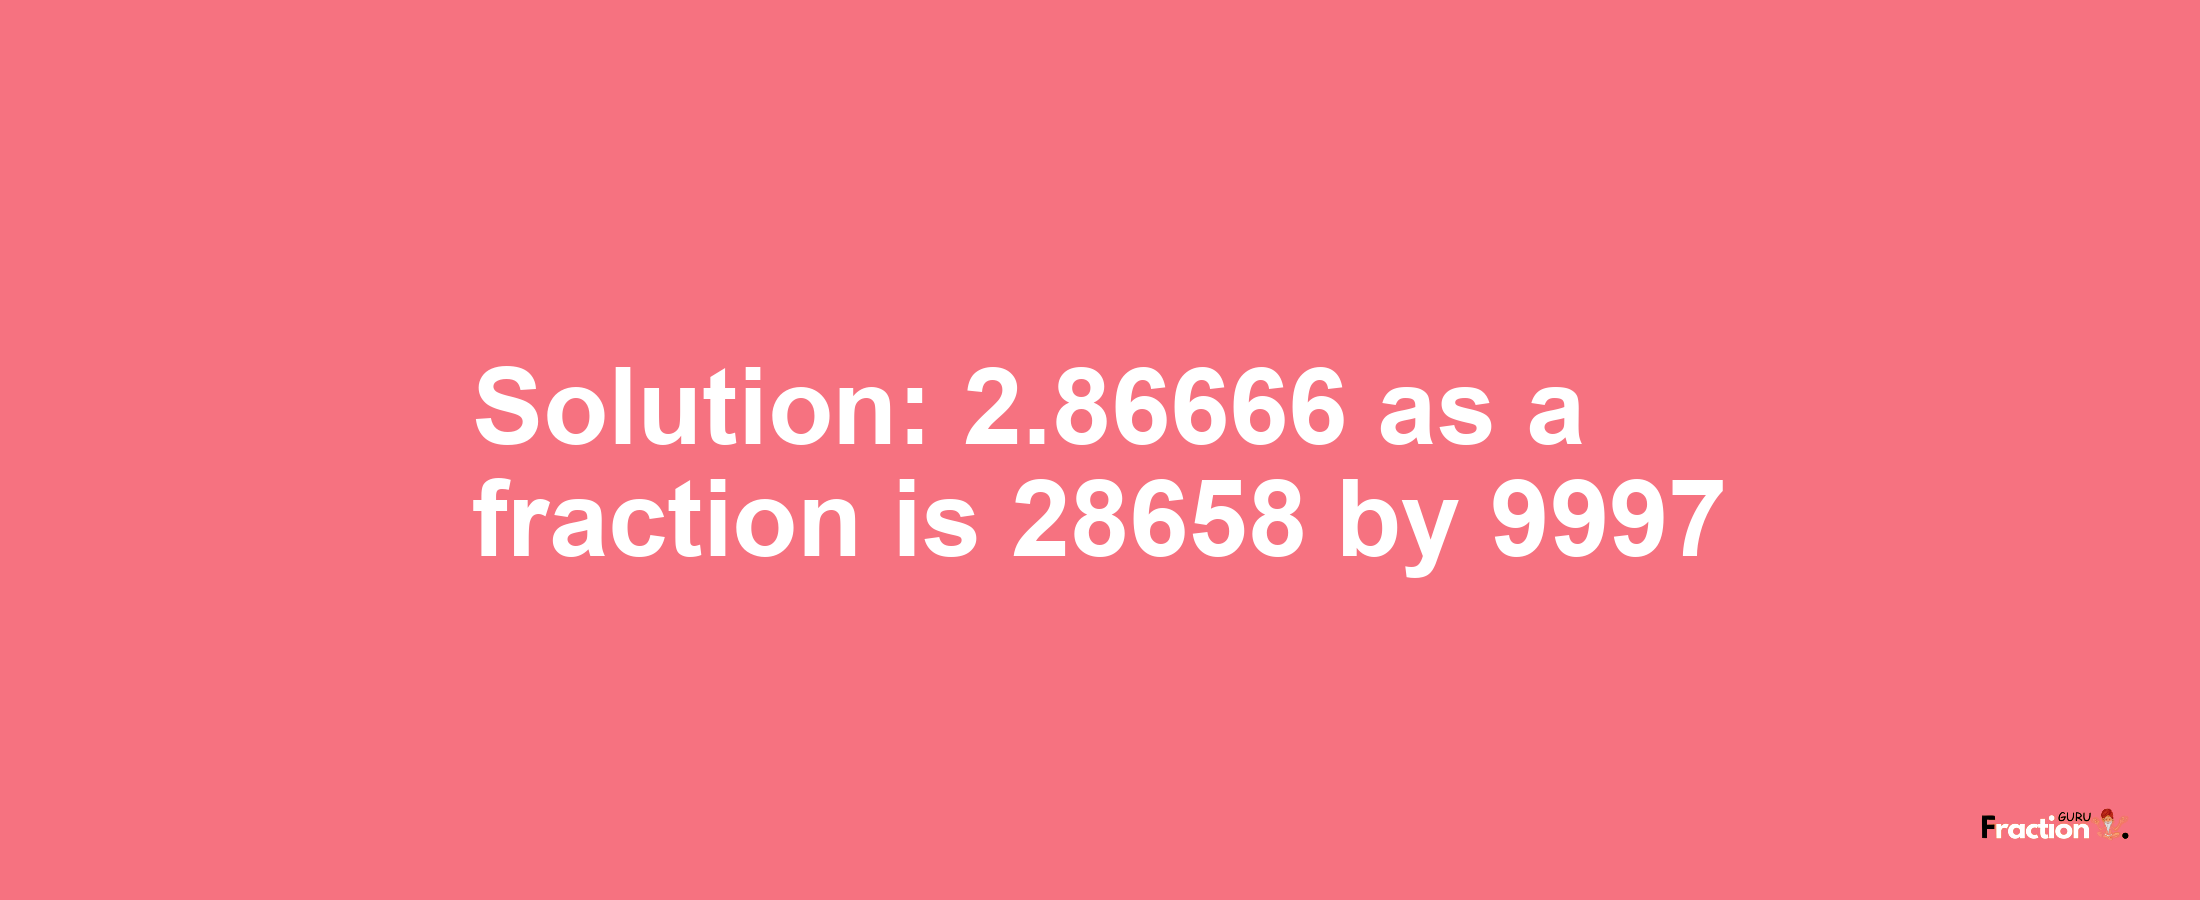 Solution:2.86666 as a fraction is 28658/9997